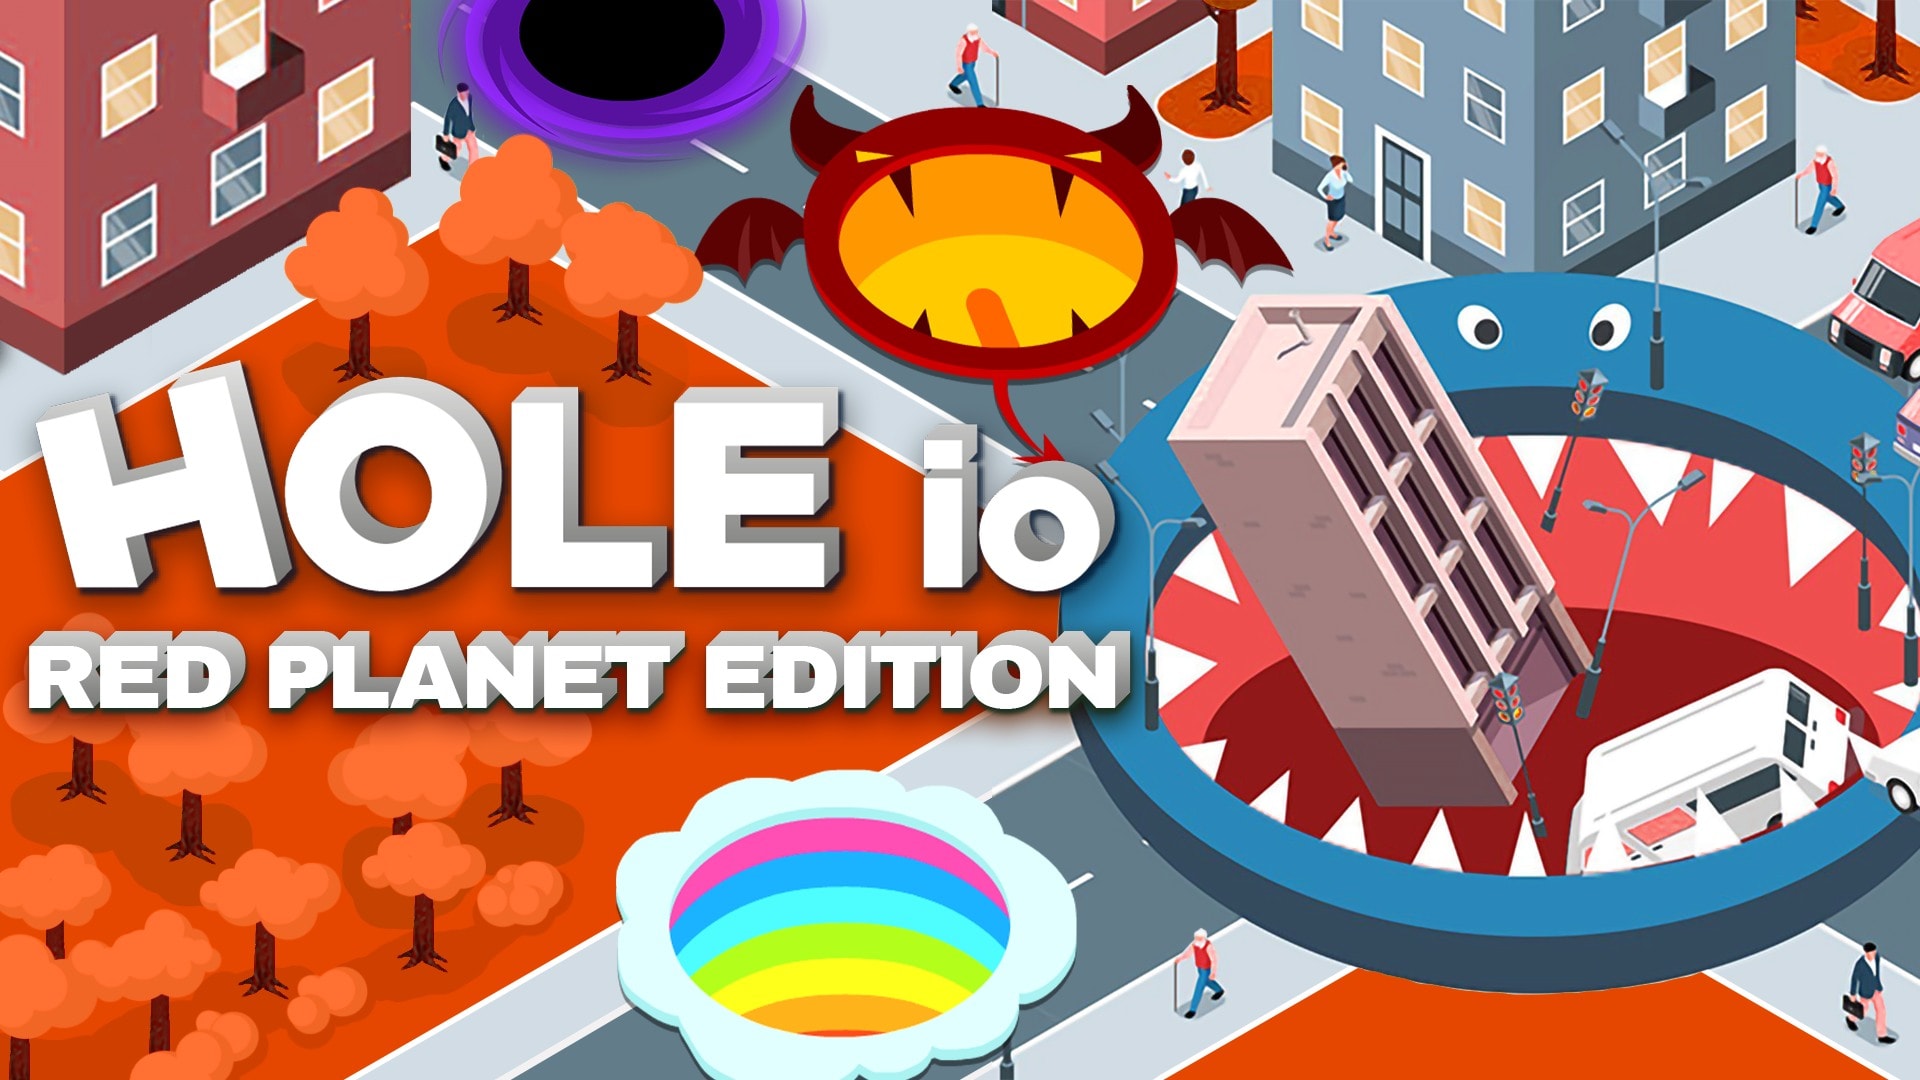 Hole io: Red Planet Edition